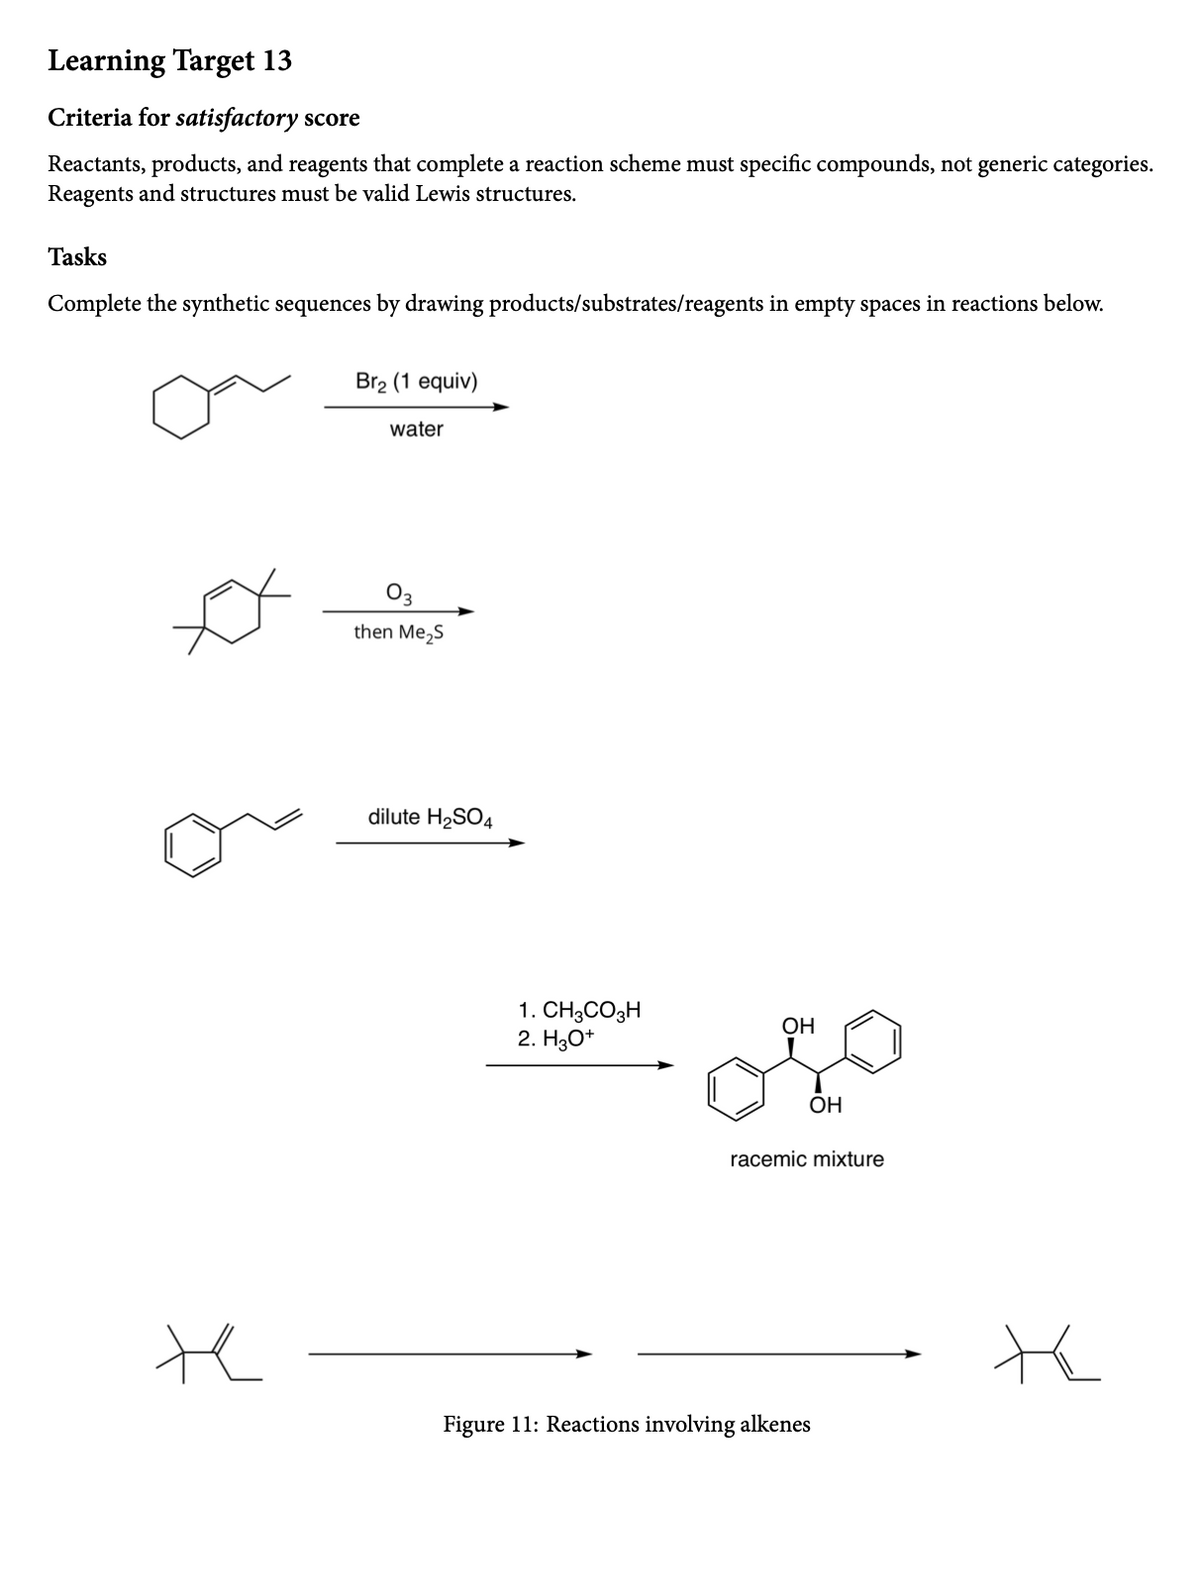 Learning Target 13
Criteria for satisfactory score
Reactants, products, and reagents that complete a reaction scheme must specific compounds, not generic categories.
Reagents and structures must be valid Lewis structures.
Tasks
Complete the synthetic sequences by drawing products/substrates/reagents in empty spaces in reactions below.
Br2 (1 equiv)
water
03
then Me,S
dilute H2SO4
1. CH3CO3H
2. H3O*
ОН
ОН
racemic mixture
te
Figure 11: Reactions involving alkenes
